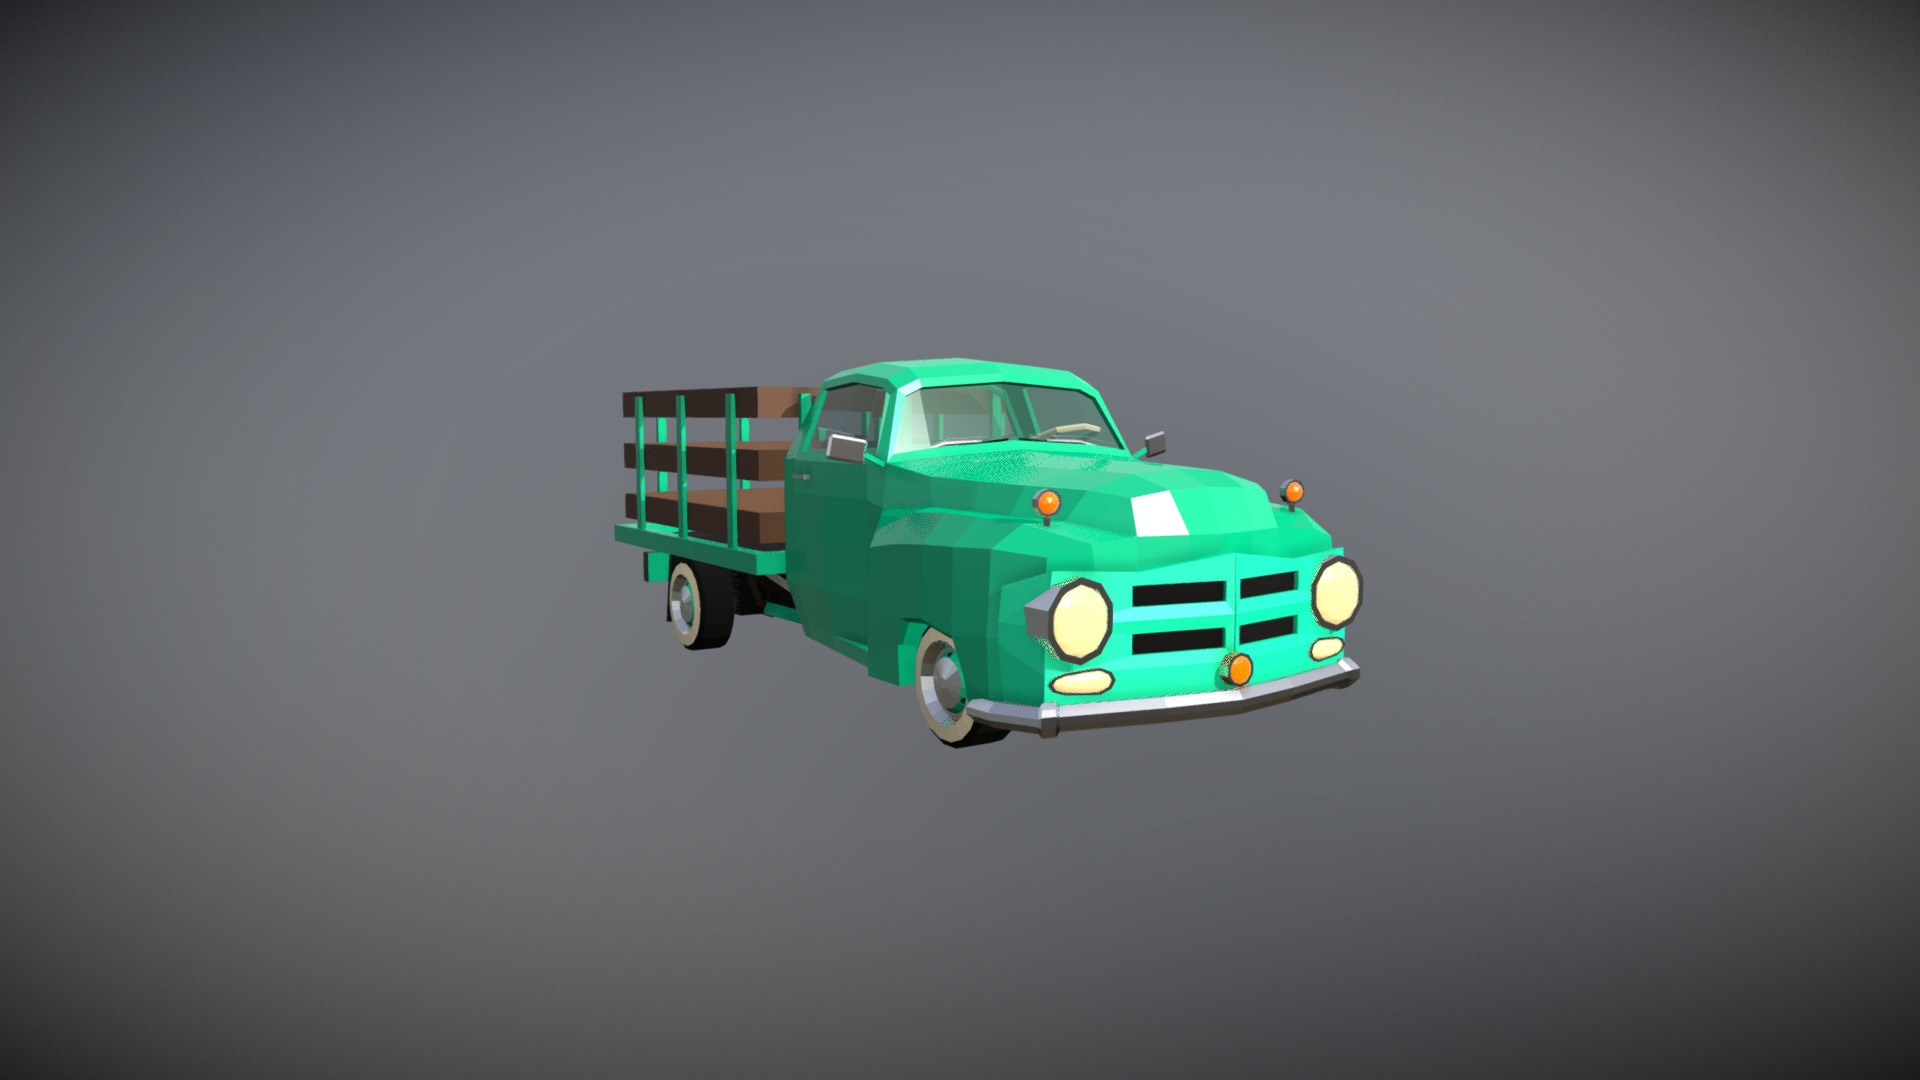 3D model Low Poly Pickup Truck - This is a 3D model of the Low Poly Pickup Truck. The 3D model is about a green toy car.